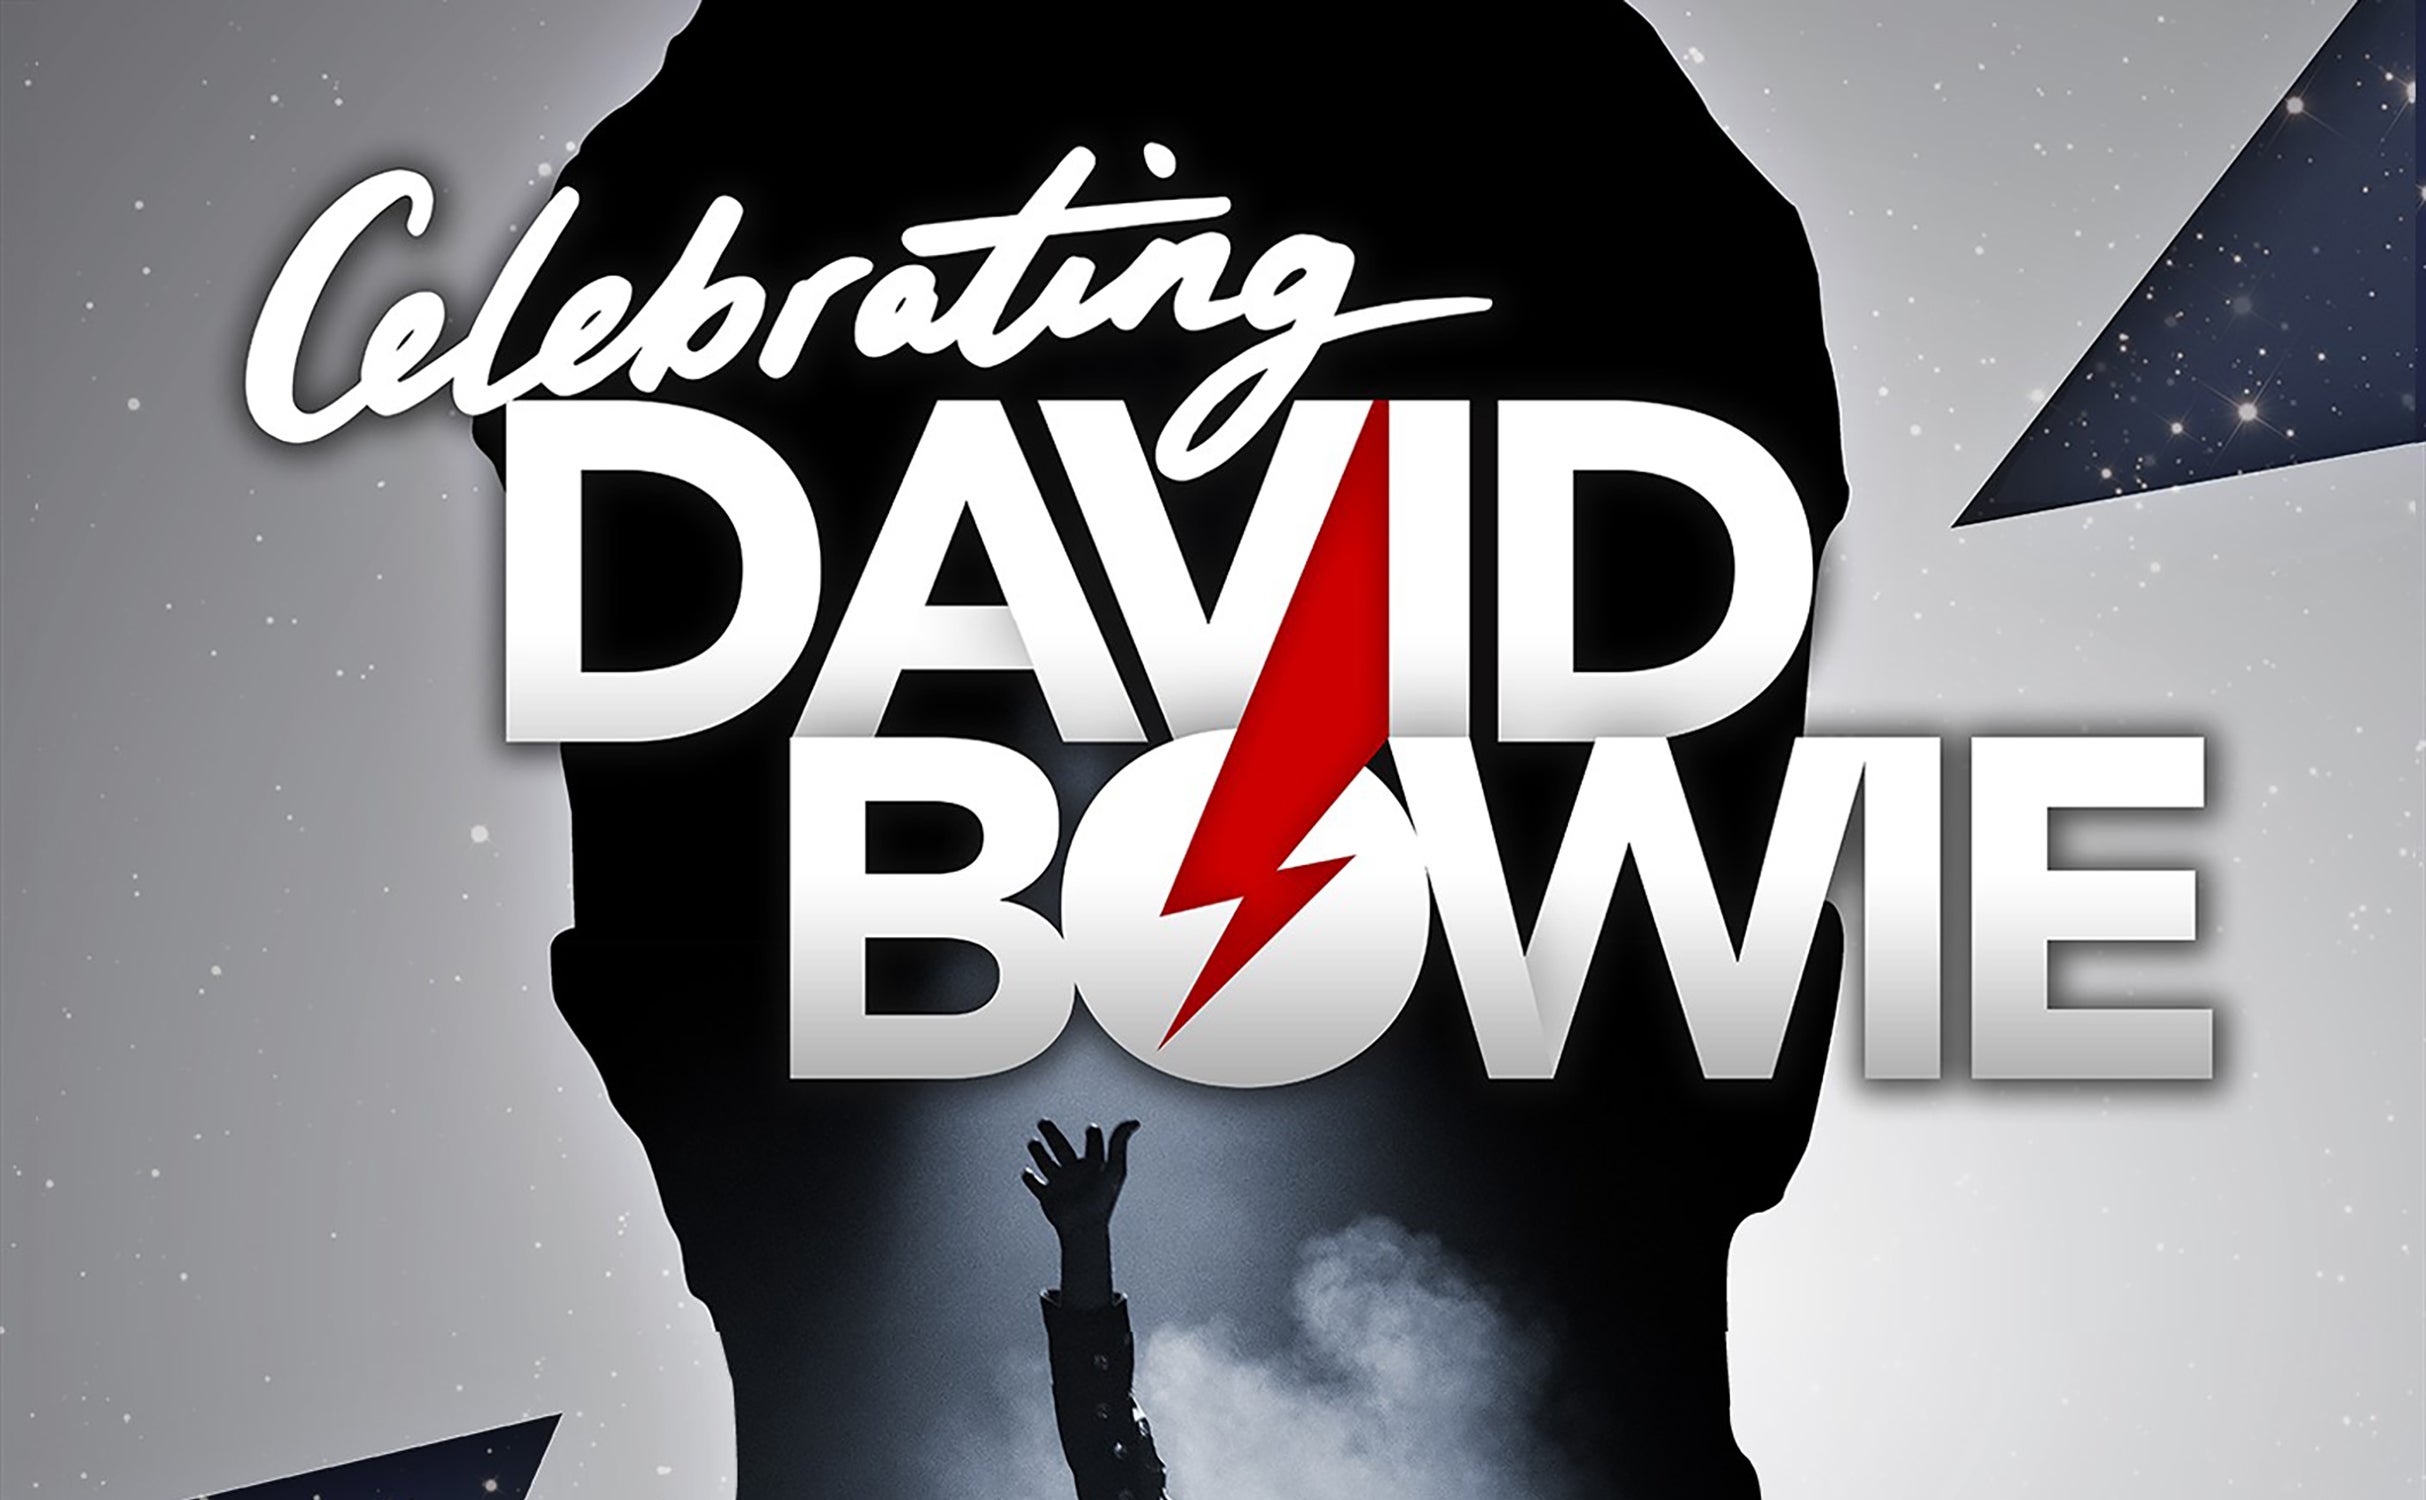 Celebrating David Bowie: Live in Concert in Ft Lauderdale promo photo for VIP Package presale offer code